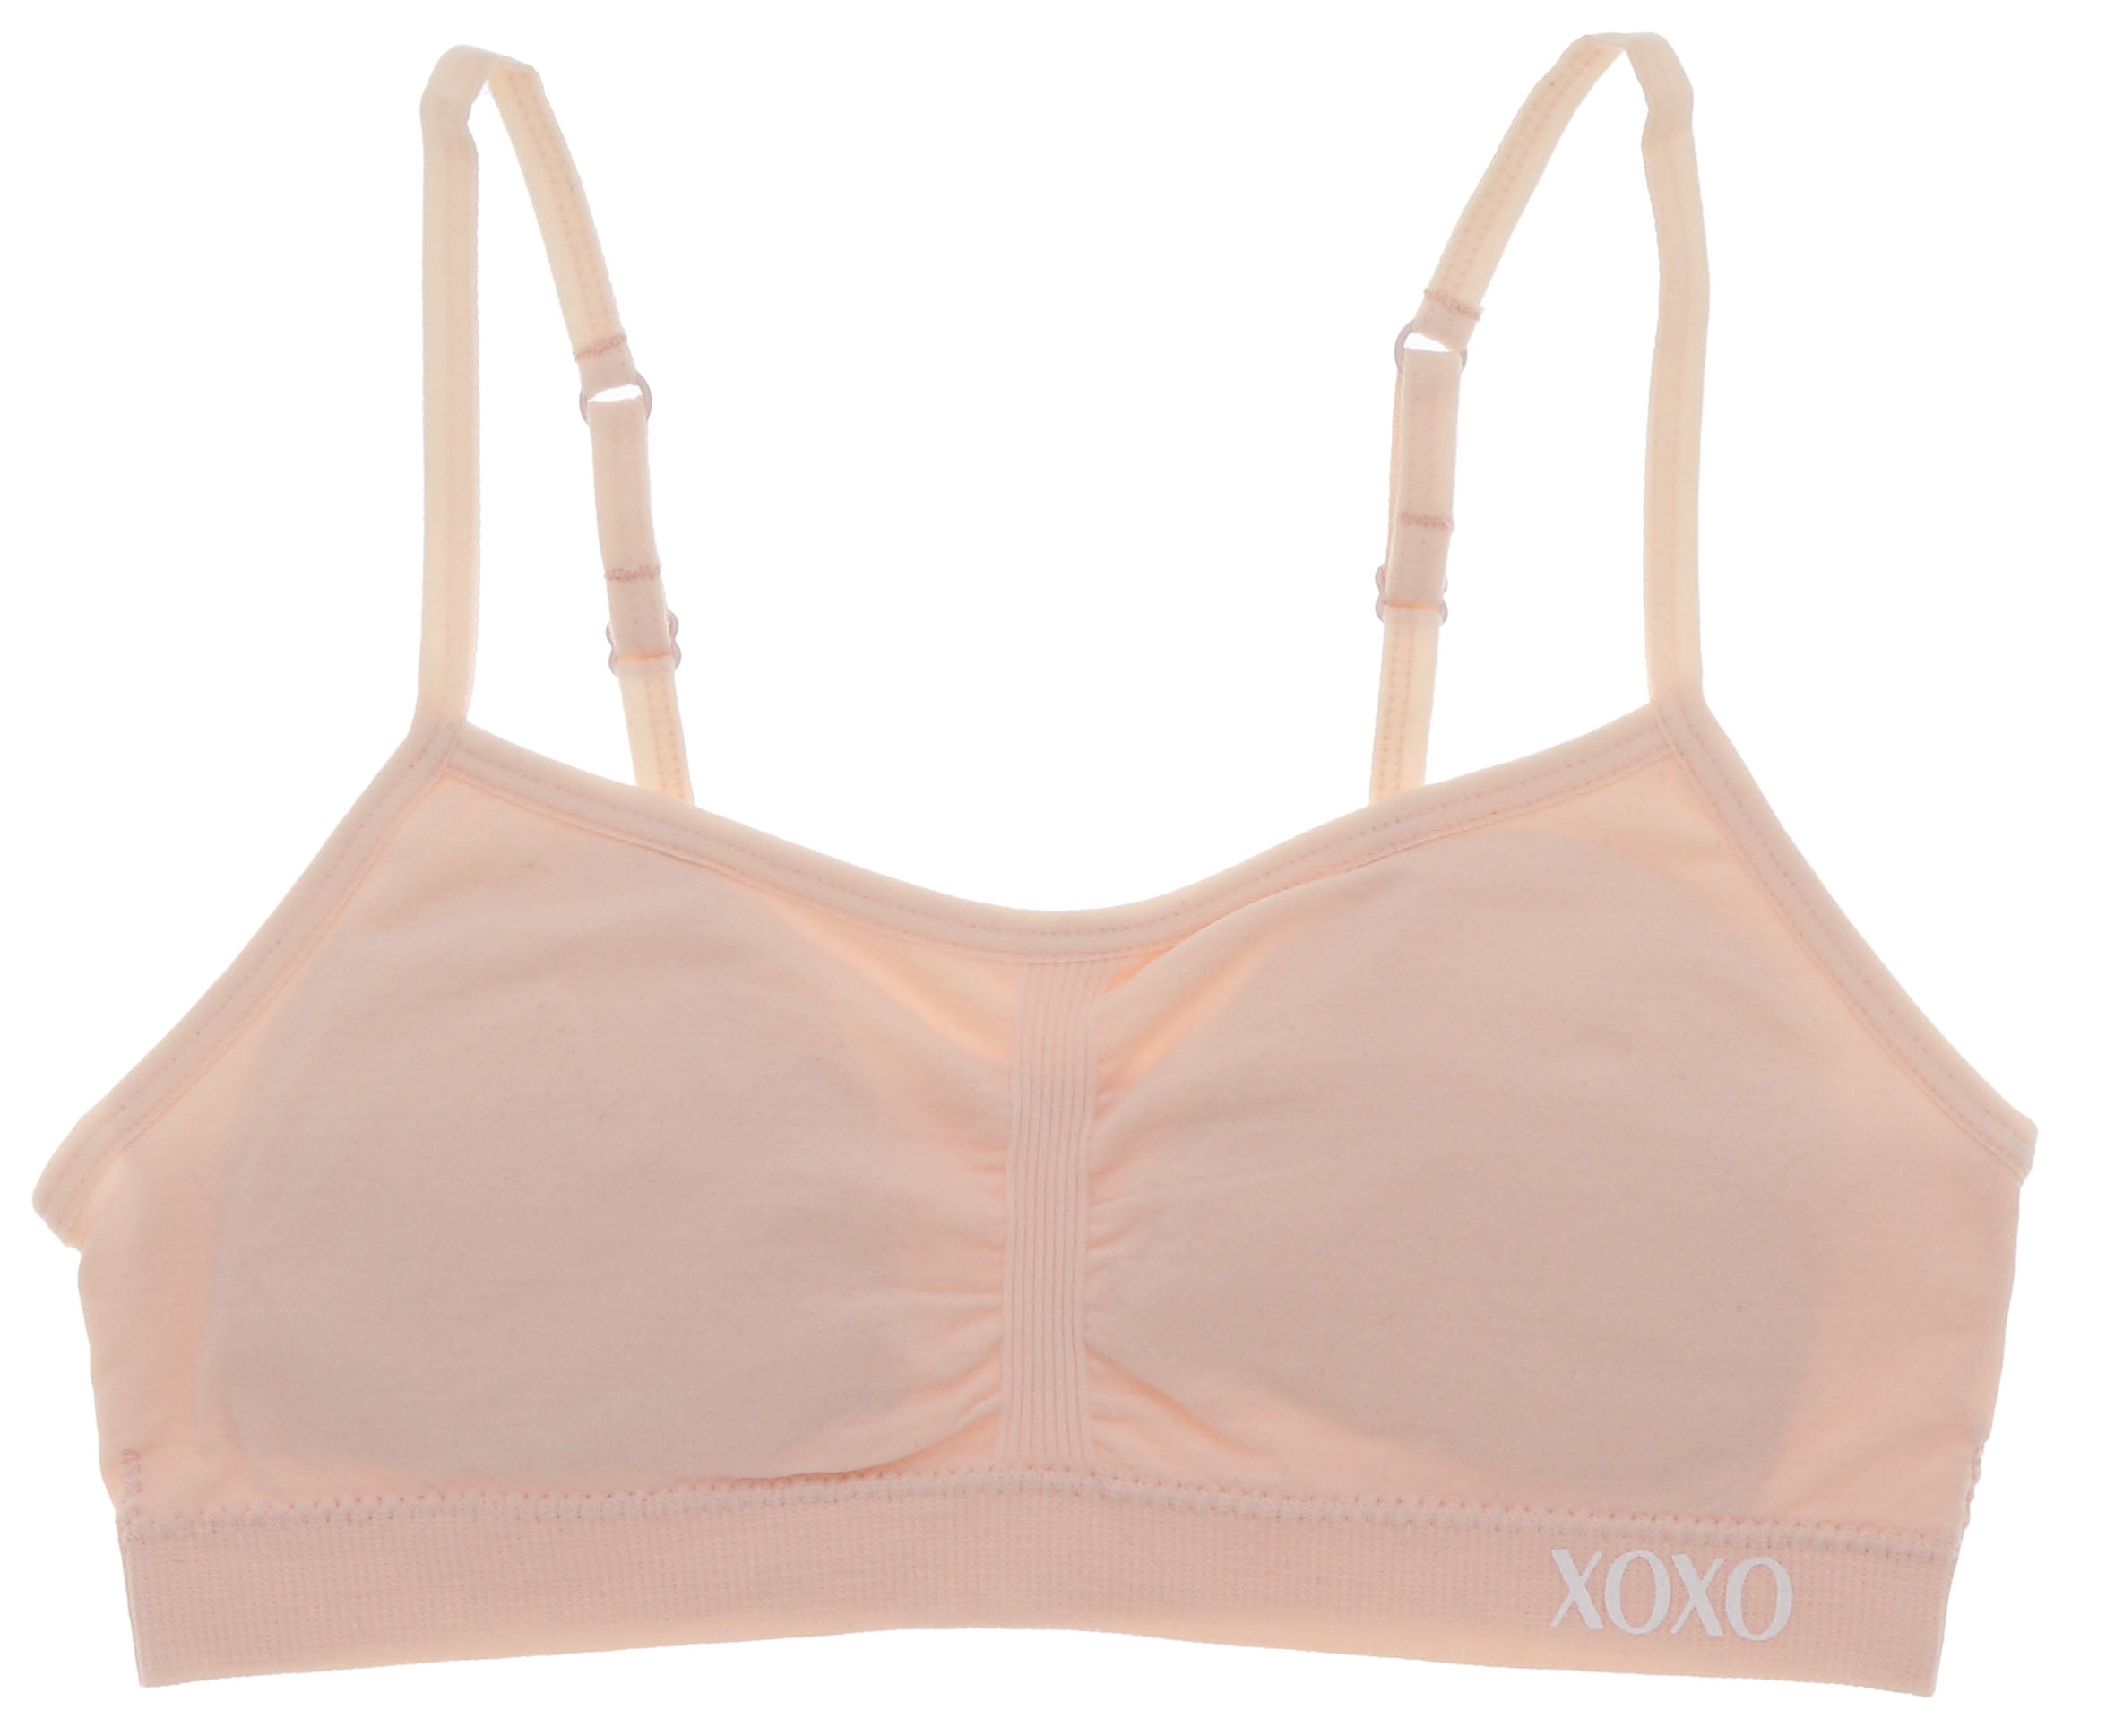 XOXO Girl's Lightly Lined Training Bra 3 Pack - White, Pink, & Love Grey -  Small 30